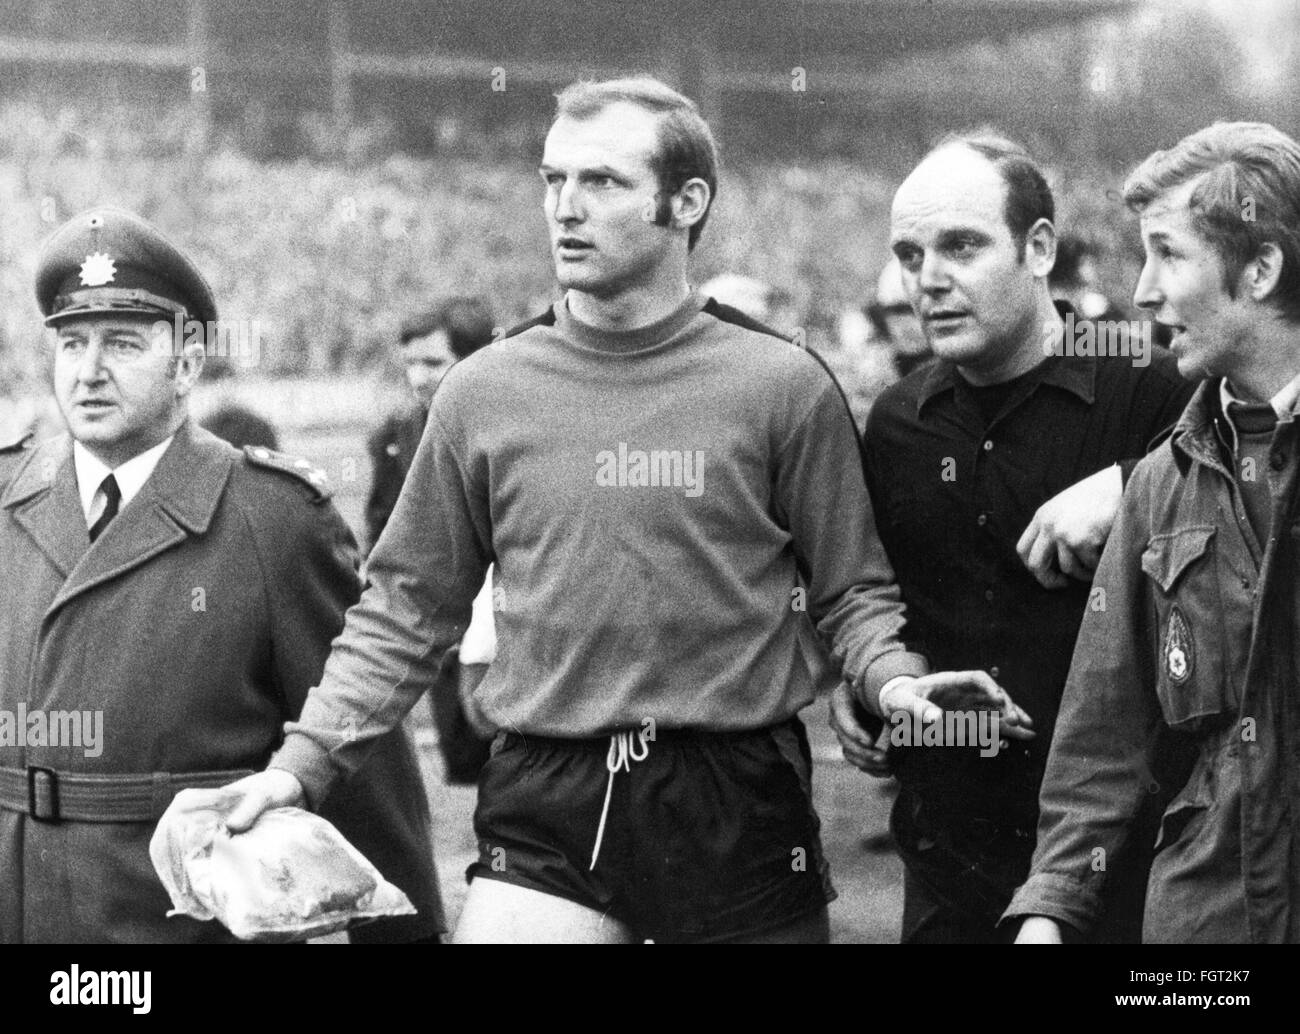 sports,football,matches,Germany,national league,1969 / 1970,28th match day,game 1. FC Koeln against Rot-Weiss Oberhausen,riot,goal keeper Manfred Manglitz and police have to protect the linesman Klaus Ohmsen,Muengersdorf stadium,Cologne,21.3.1970,rumpus,affray,turmoil,athletes,athlete,footballer,footballers,kicker,referee,ref,referees,red white,West Germany,Western Germany,Germany,1970s,70s,20th century,people,men,man,male,football,soccer,footballs,soccer balls,national league,German professional football league,German p,Additional-Rights-Clearences-Not Available Stock Photo